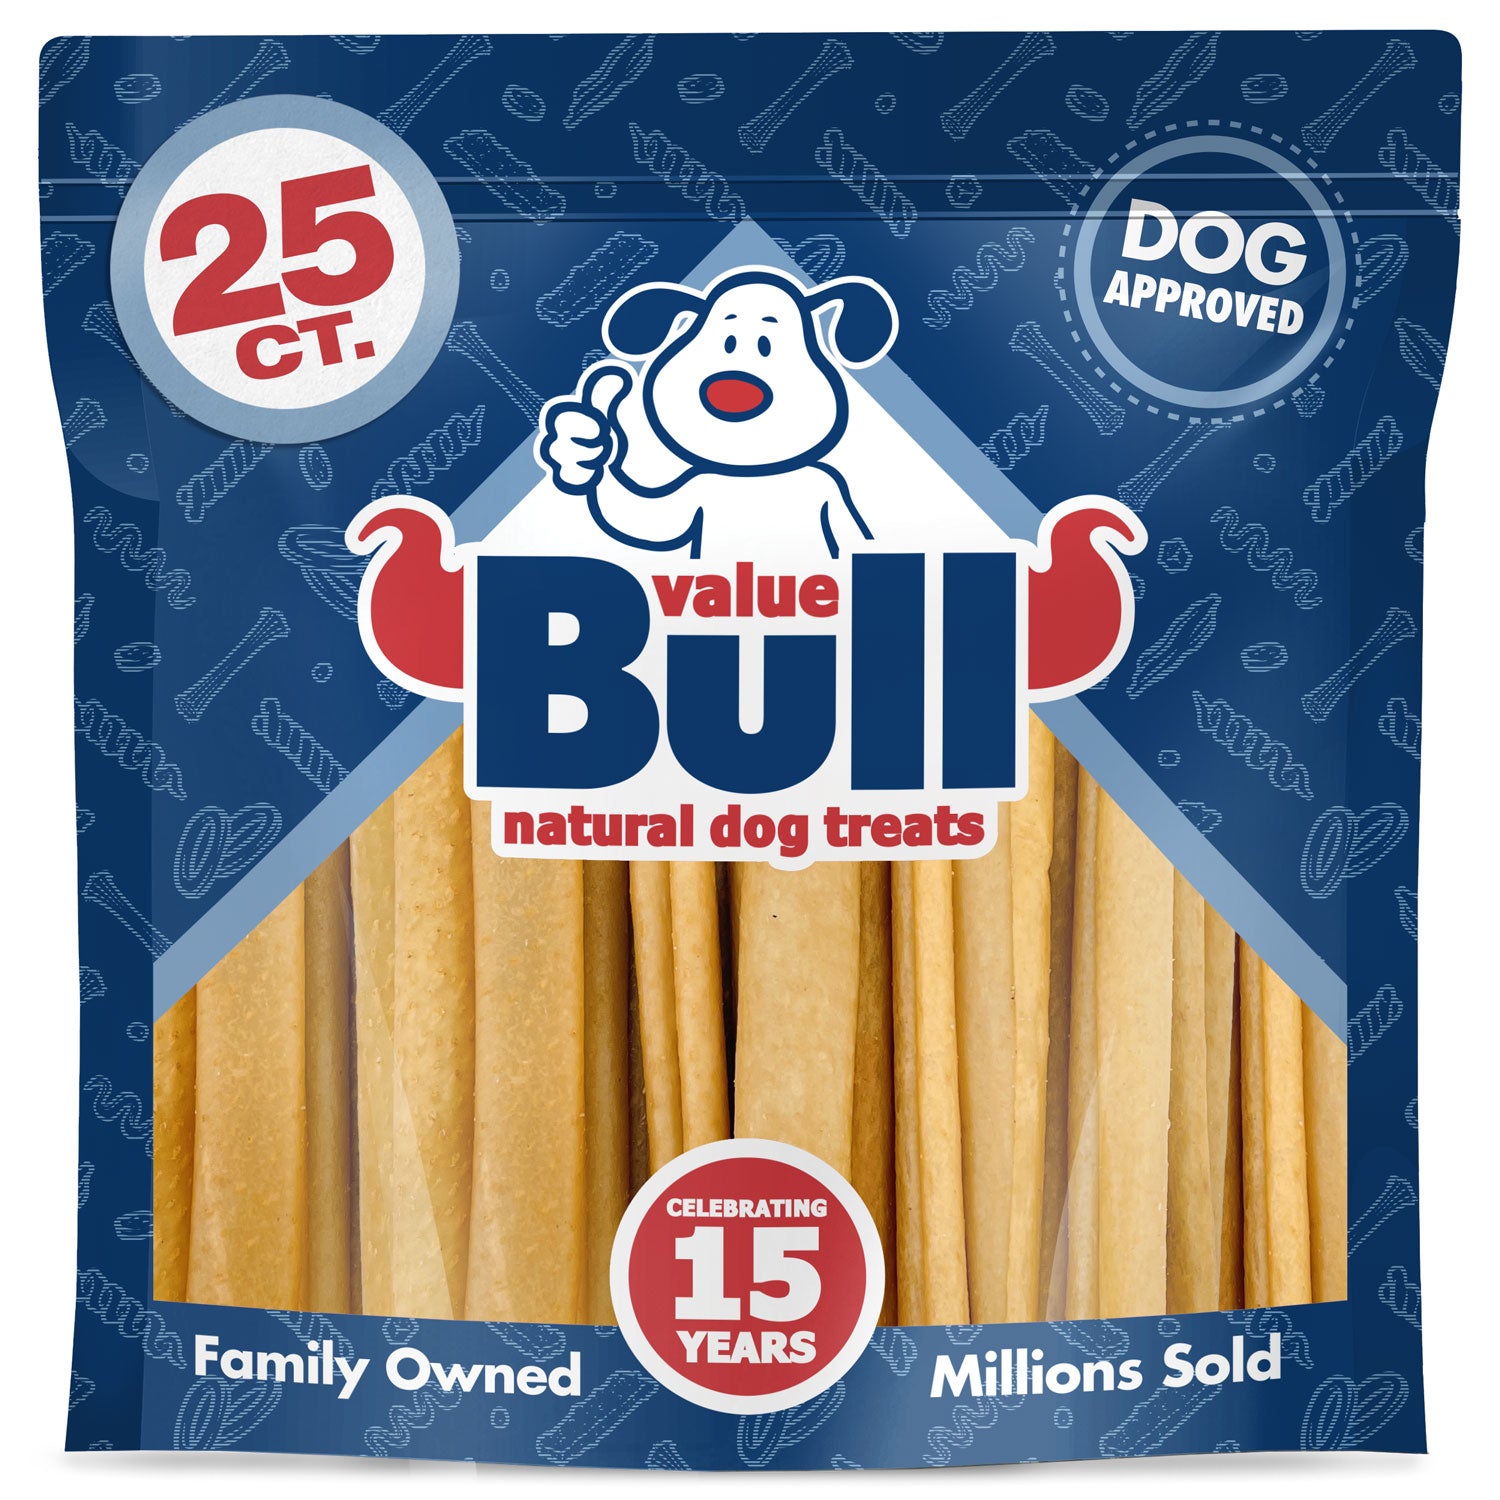 ValueBull USA Pig Skin Retriever Rolls, 6 Inch, Smoked, 25 Count